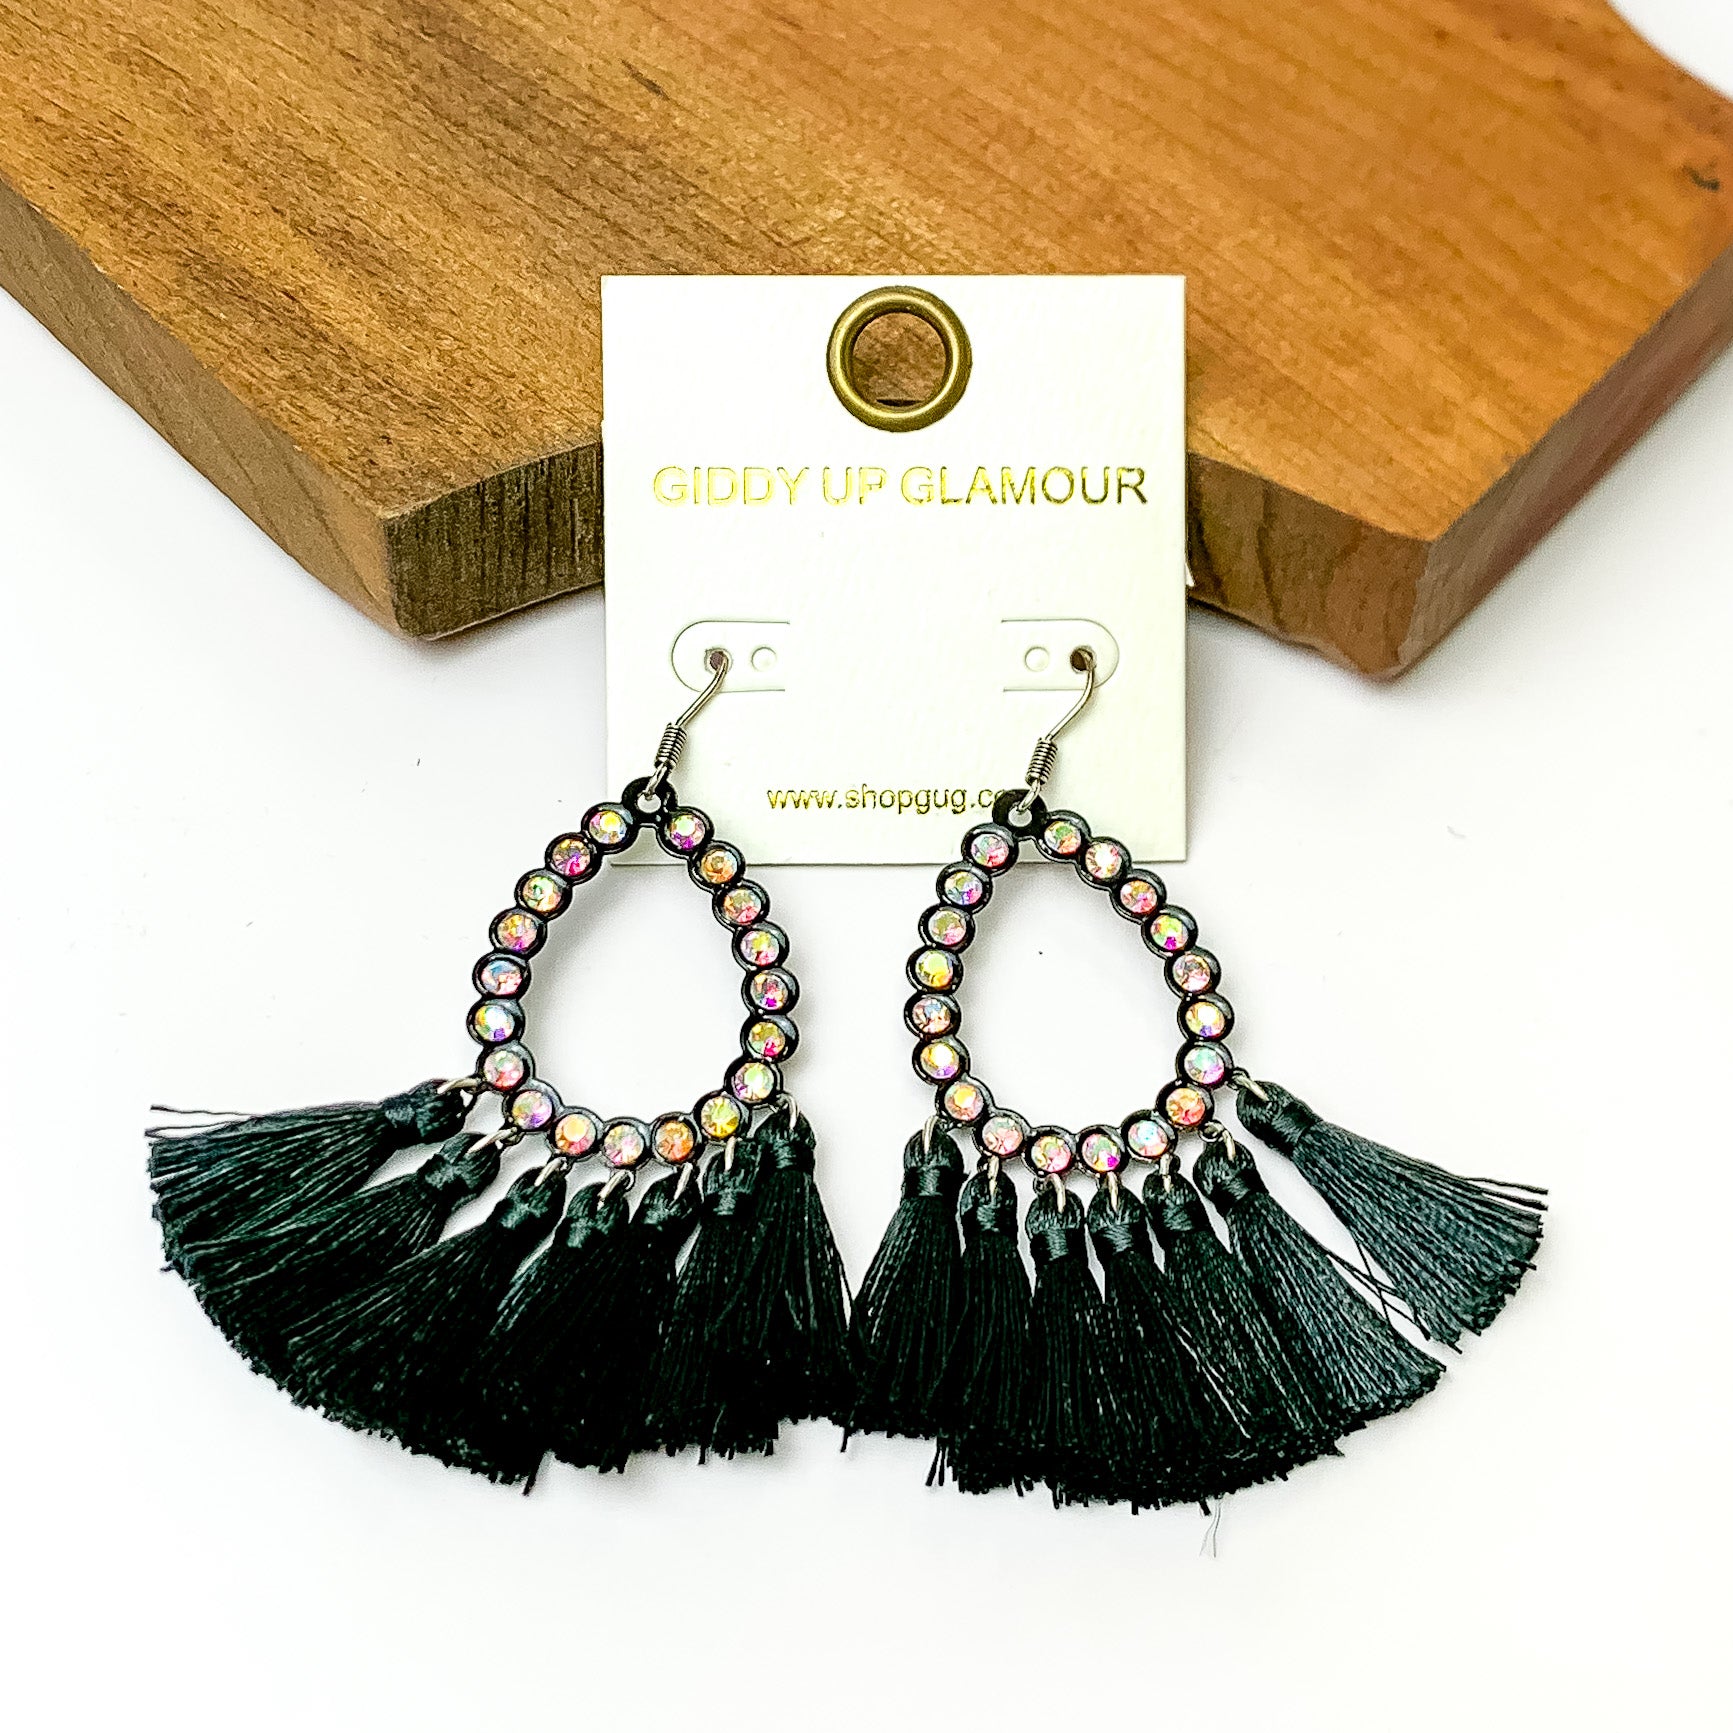 AB crystals open teardrop earrings with black fringe at the bottom. Pictured on a white background with a wood piece at the top. 